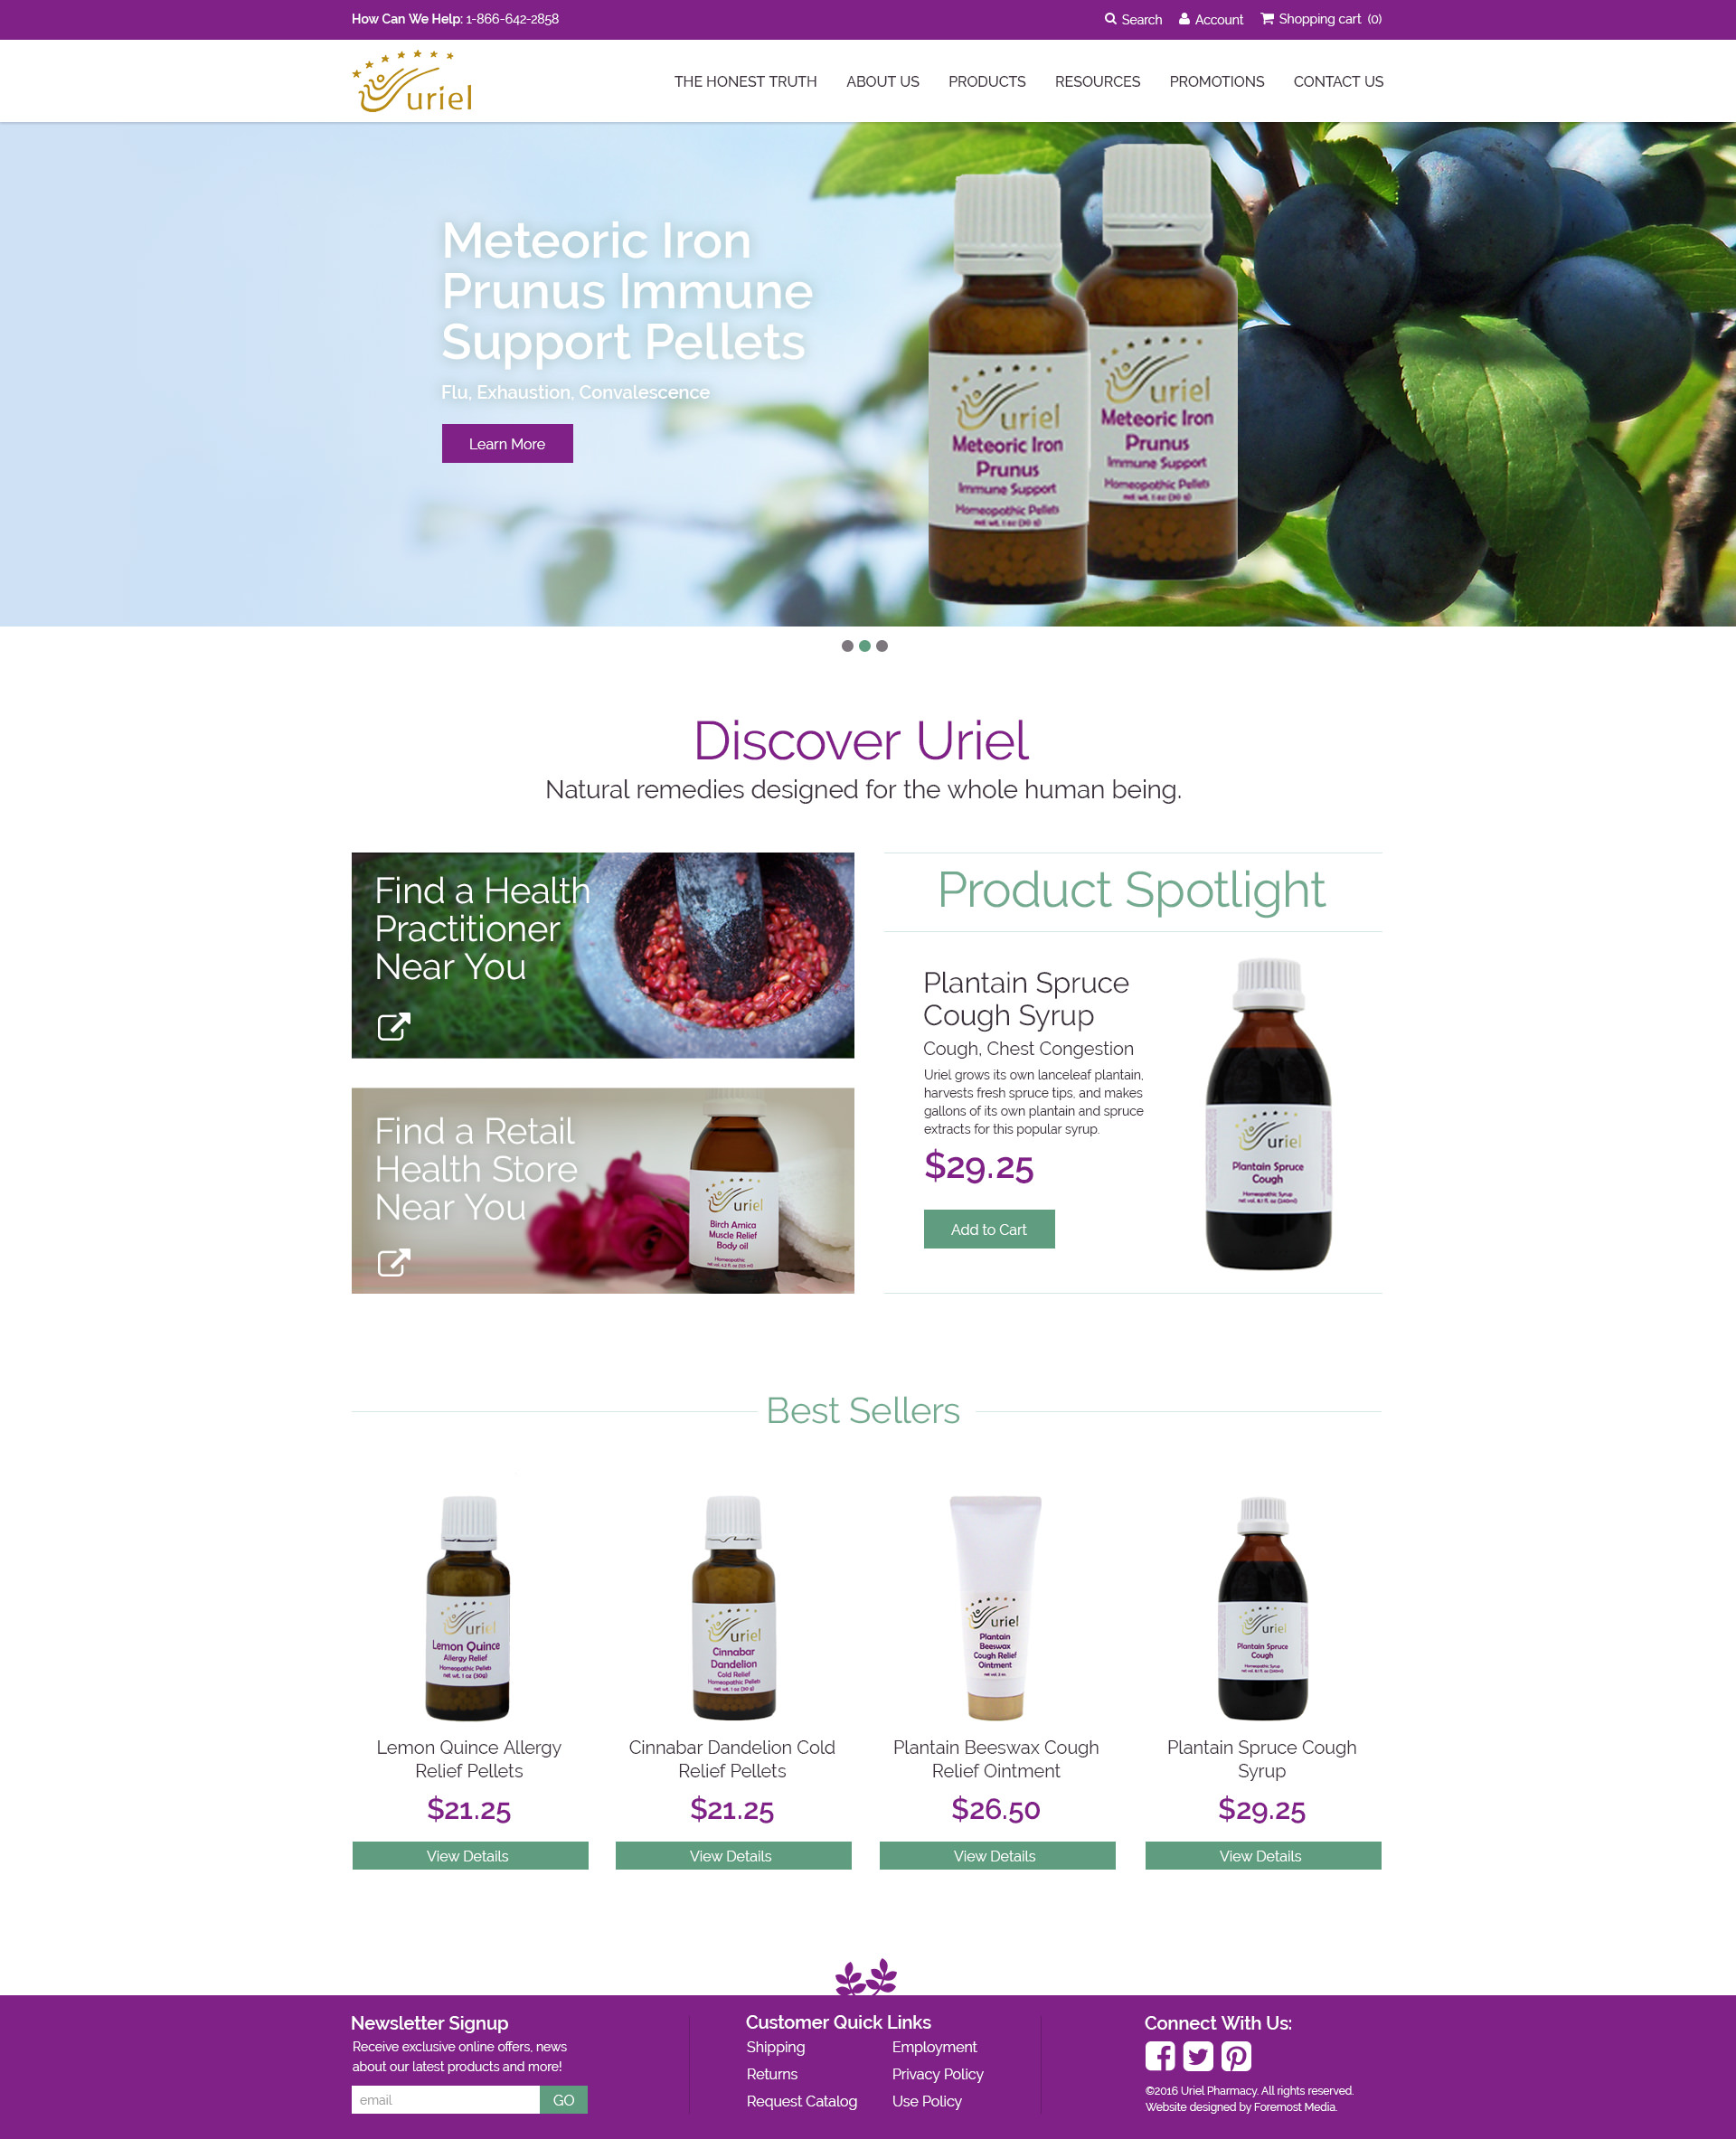 Example of the new and improved nopCommerce website designed by Foremost Media for Uriel